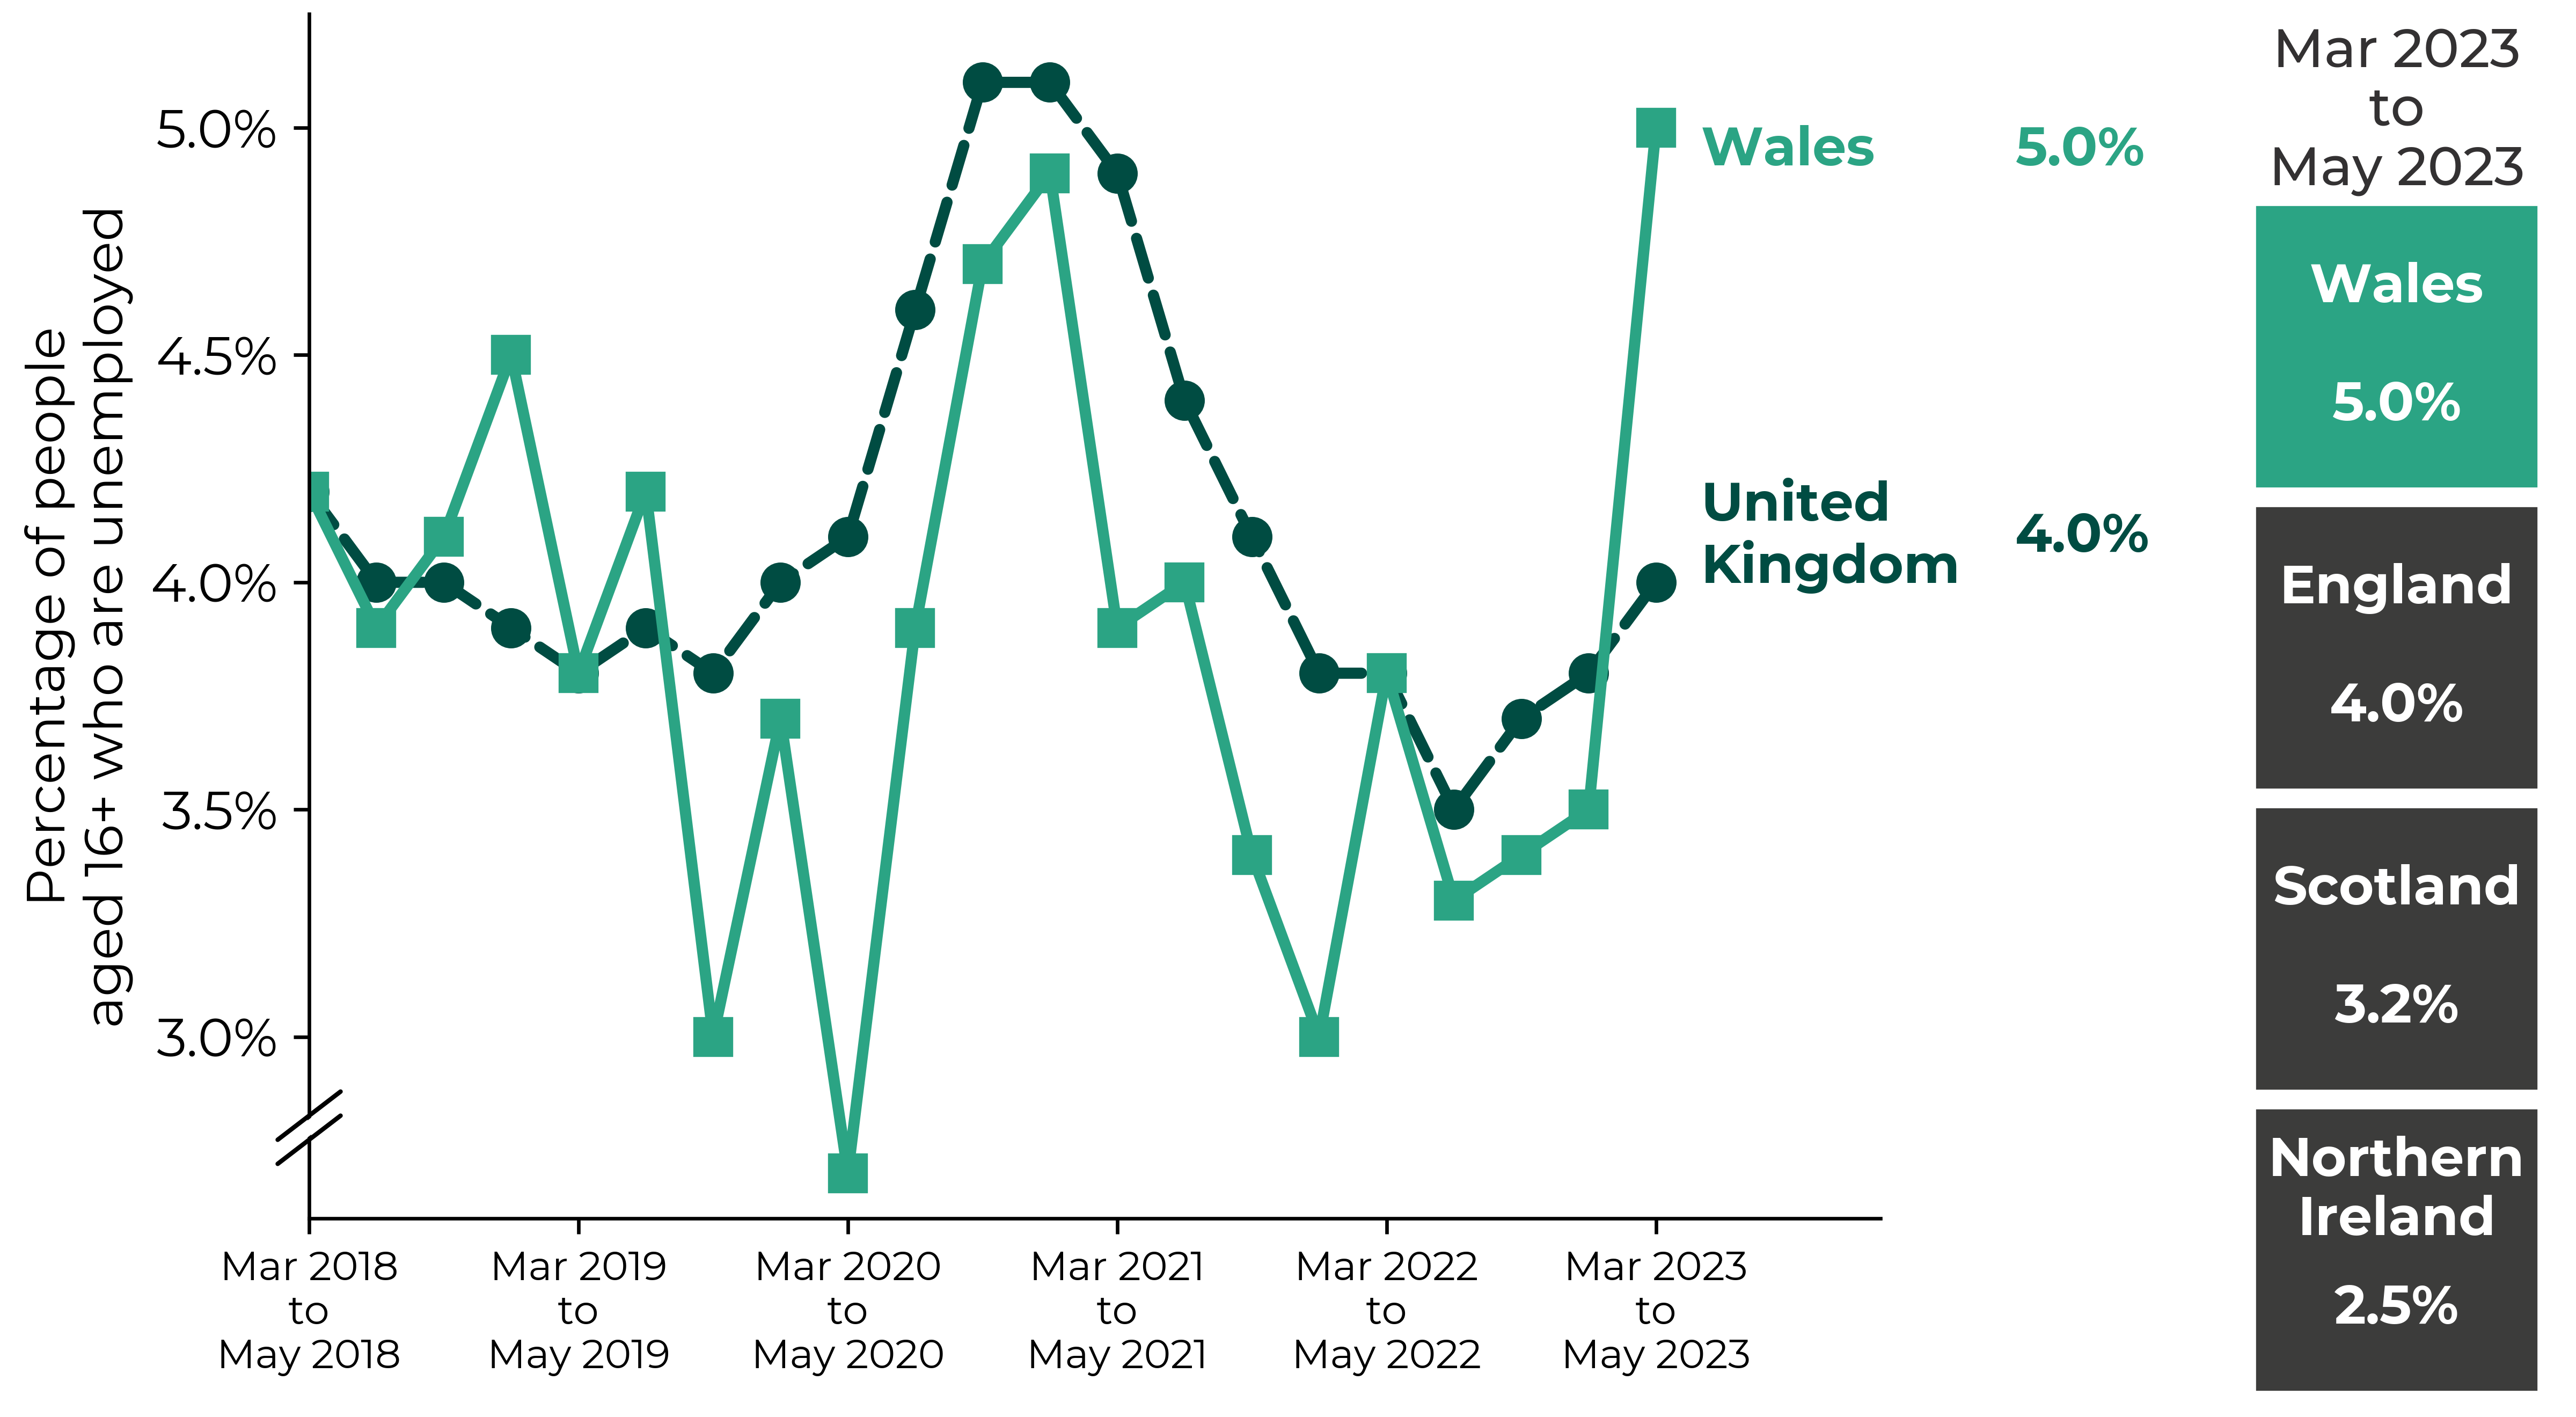 Graph showing an overall decrease in Wales' unemployment rate from over 4% in 2018 to under 3% in early 2020. This was followed by a peak of almost 5% during 2021 and returning to around 3% by 2022. UK unemployment rate followed a similar pattern. Figures for the latest period (March 2023 to May 2023) are Northern Ireland 2.5%, Scotland 3.2%, England 4.0%, Wales 5.0% and UK 4.0%. This indicates a sharp increase in Wales unemployment